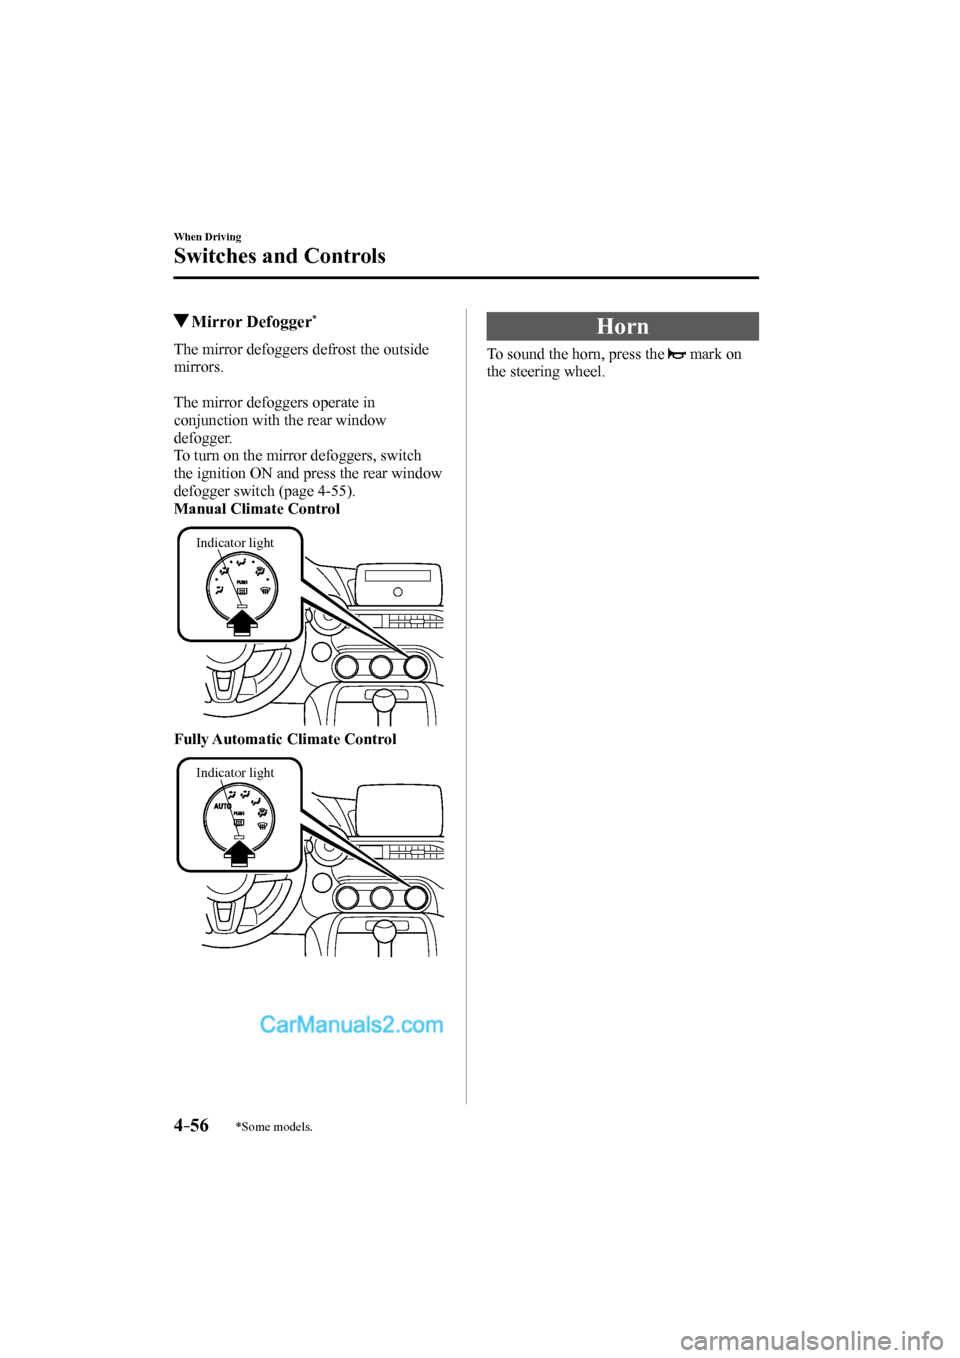 MAZDA MODEL MX-5 2017  Owners Manual (in English) 4–56
When Driving
Switches and Controls
*Some models.
         Mirror  Defogger * 
           The  mirror  defoggers  defrost  the  outside 
mirrors.
  
 The mirror defoggers operate in 
conjunction